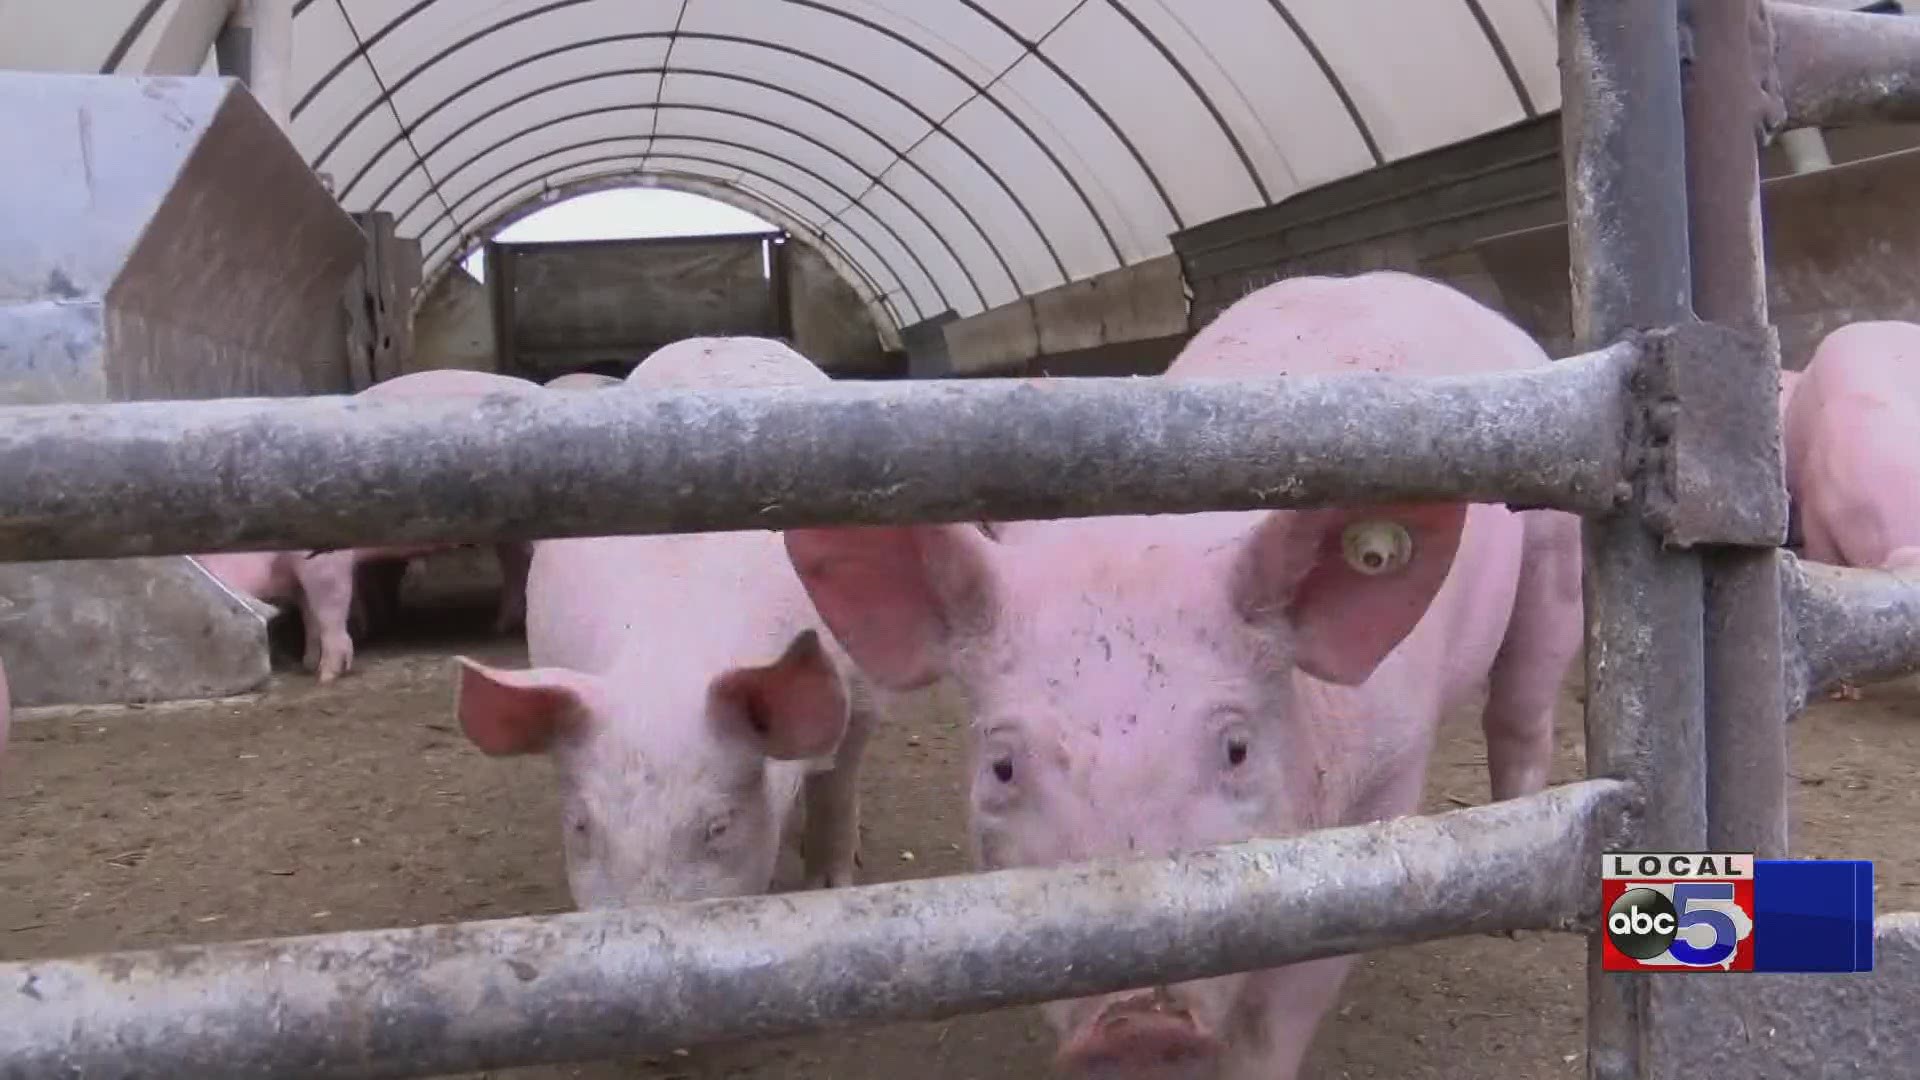 Iowa State University estimated roughly 600,000 pigs in Iowa haven't been harvested as of mid-May because of COVID-19-related supply chain issues.